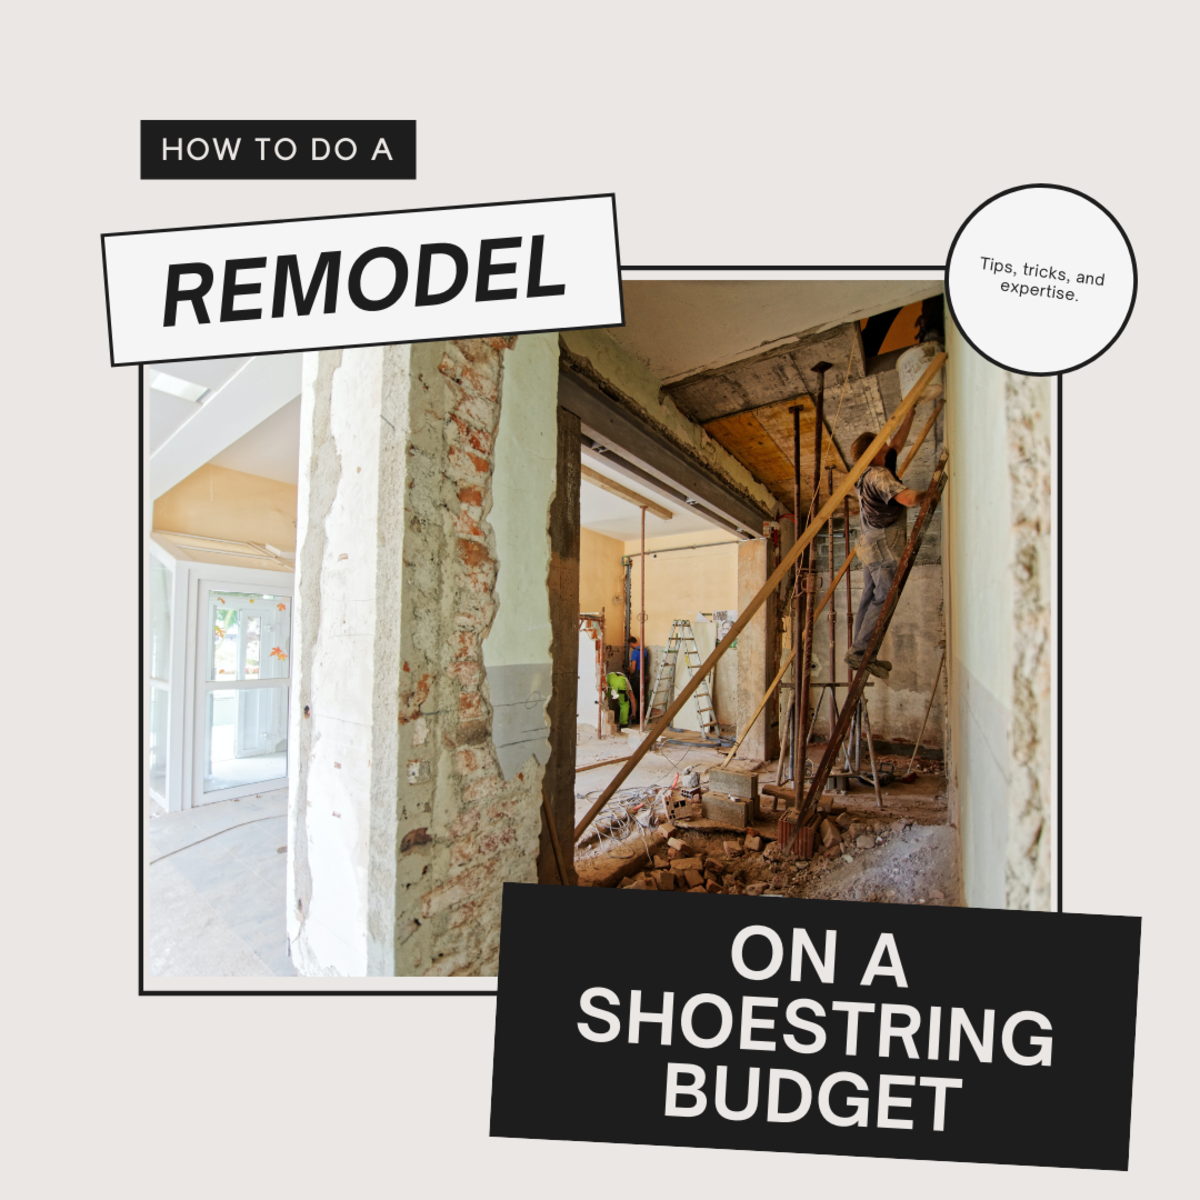 How to Remodel on a Shoestring Budget